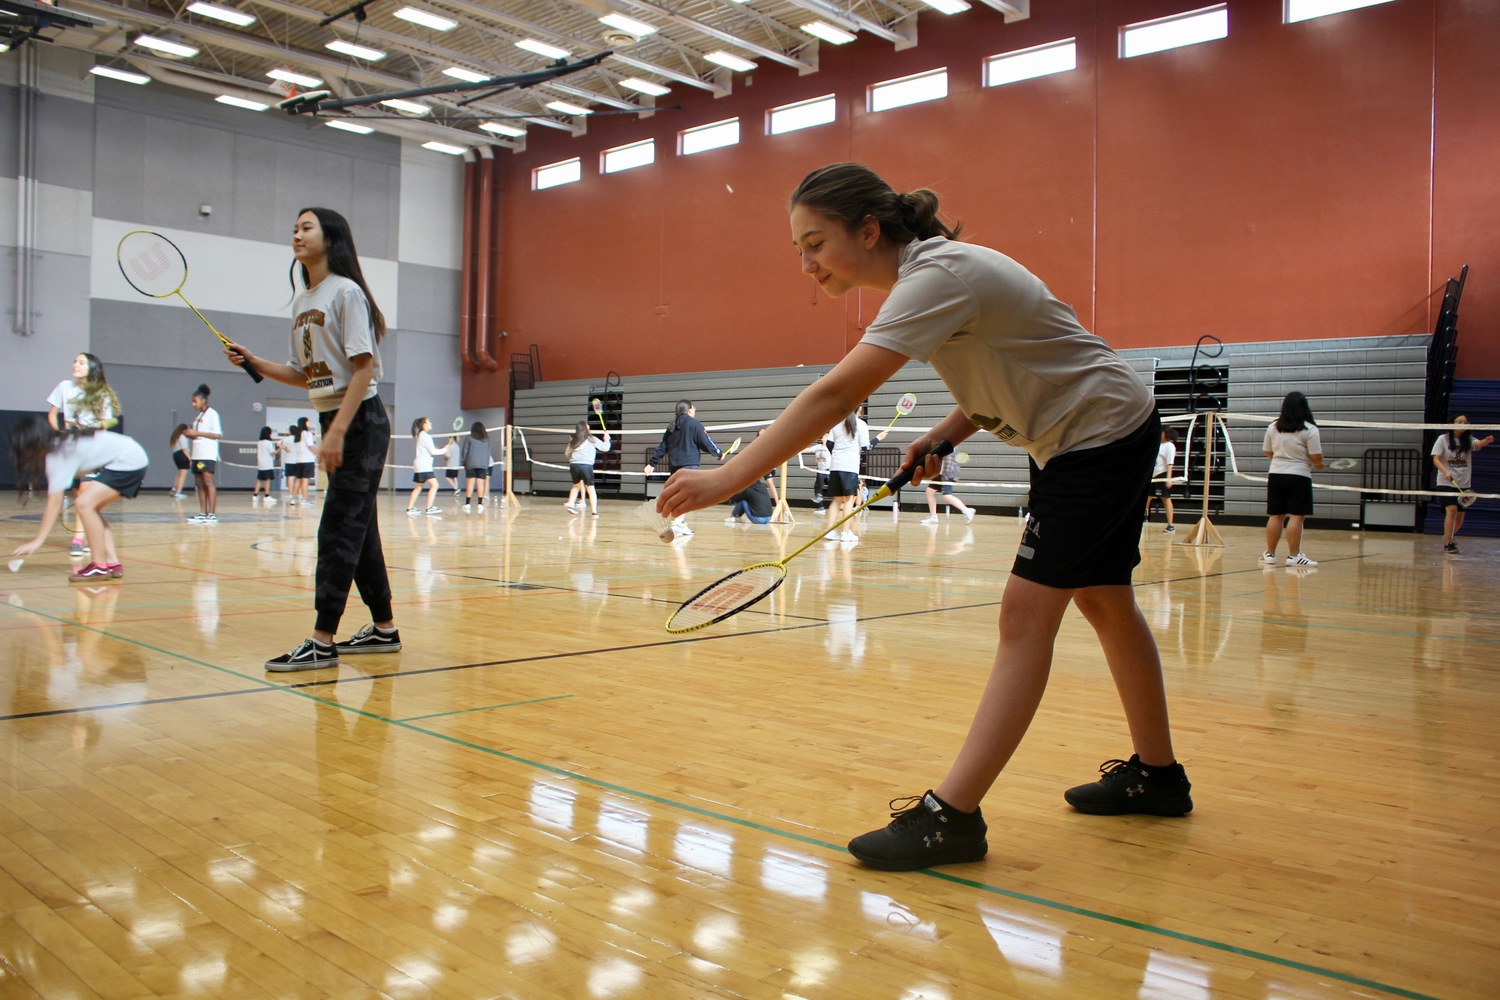 80+spots+for+Badminton+served+quickly